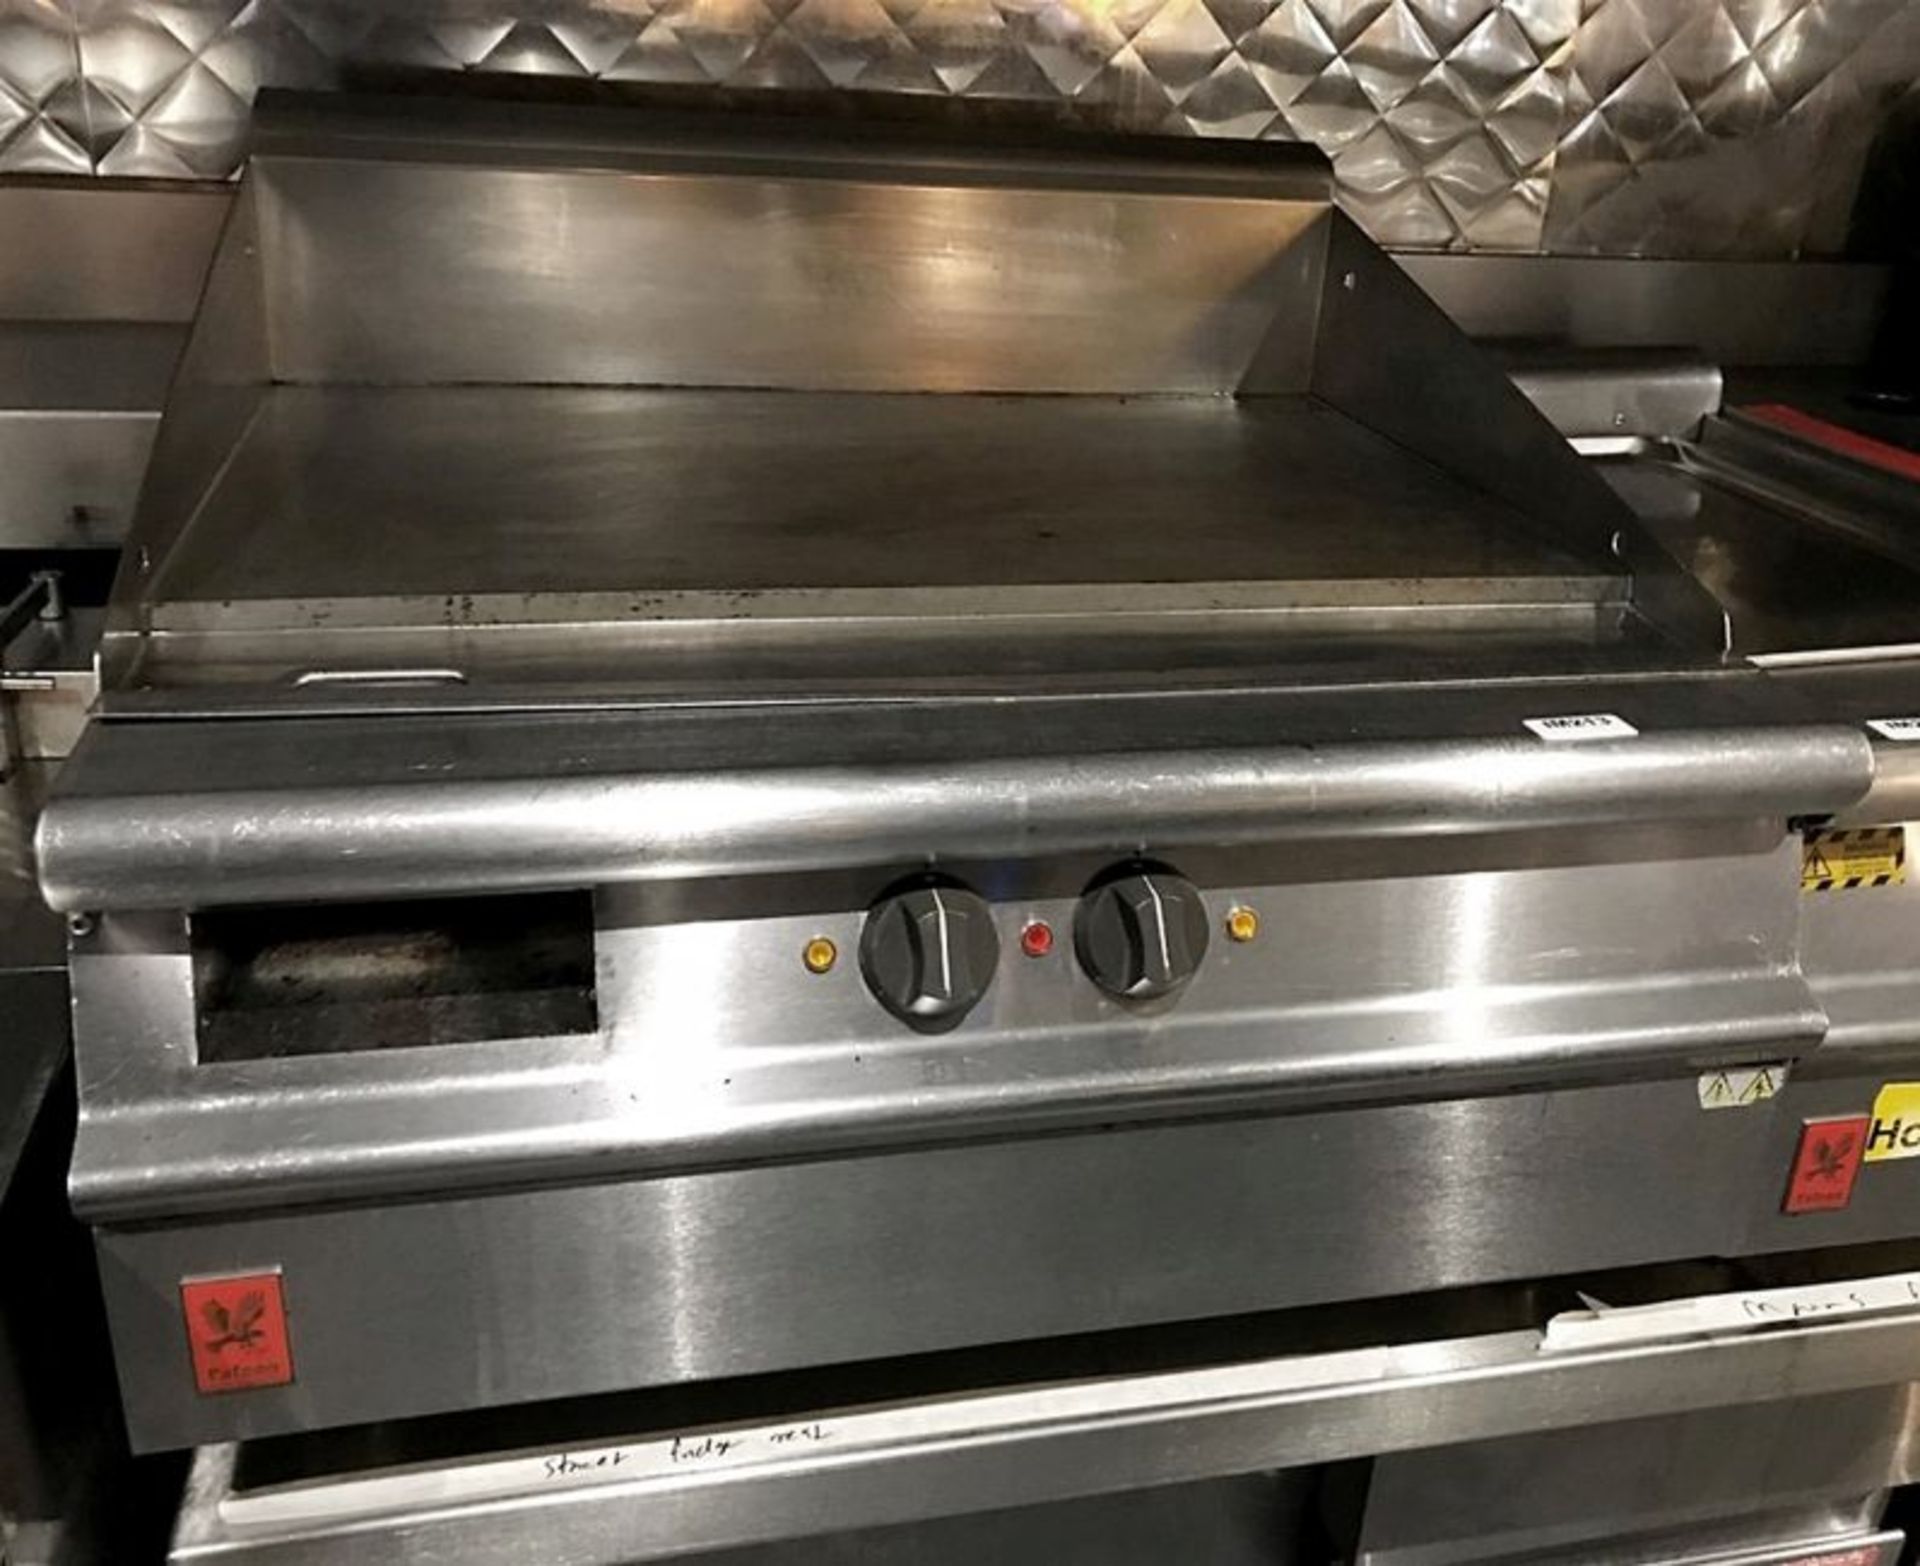 1 x Falcon Dominator E3841 Solid Top Cooking Griddle - Image 8 of 9